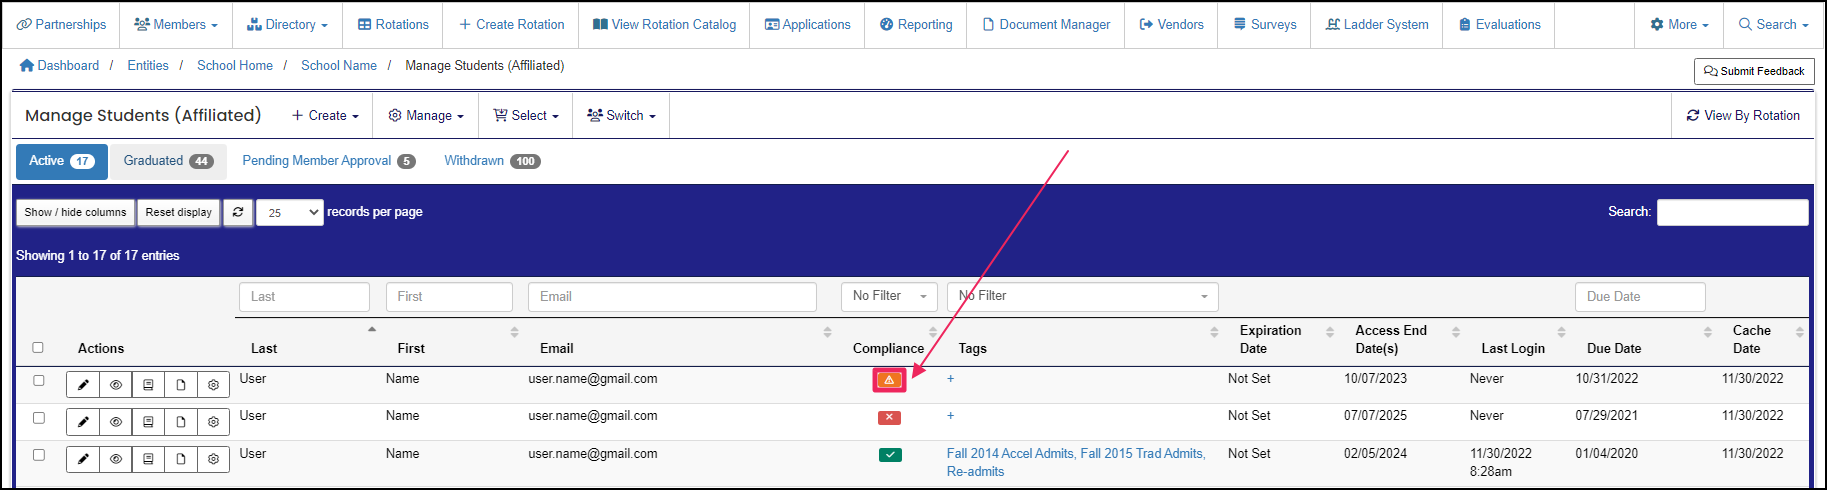 Manage member by affiliation table highlighting expired compliance items